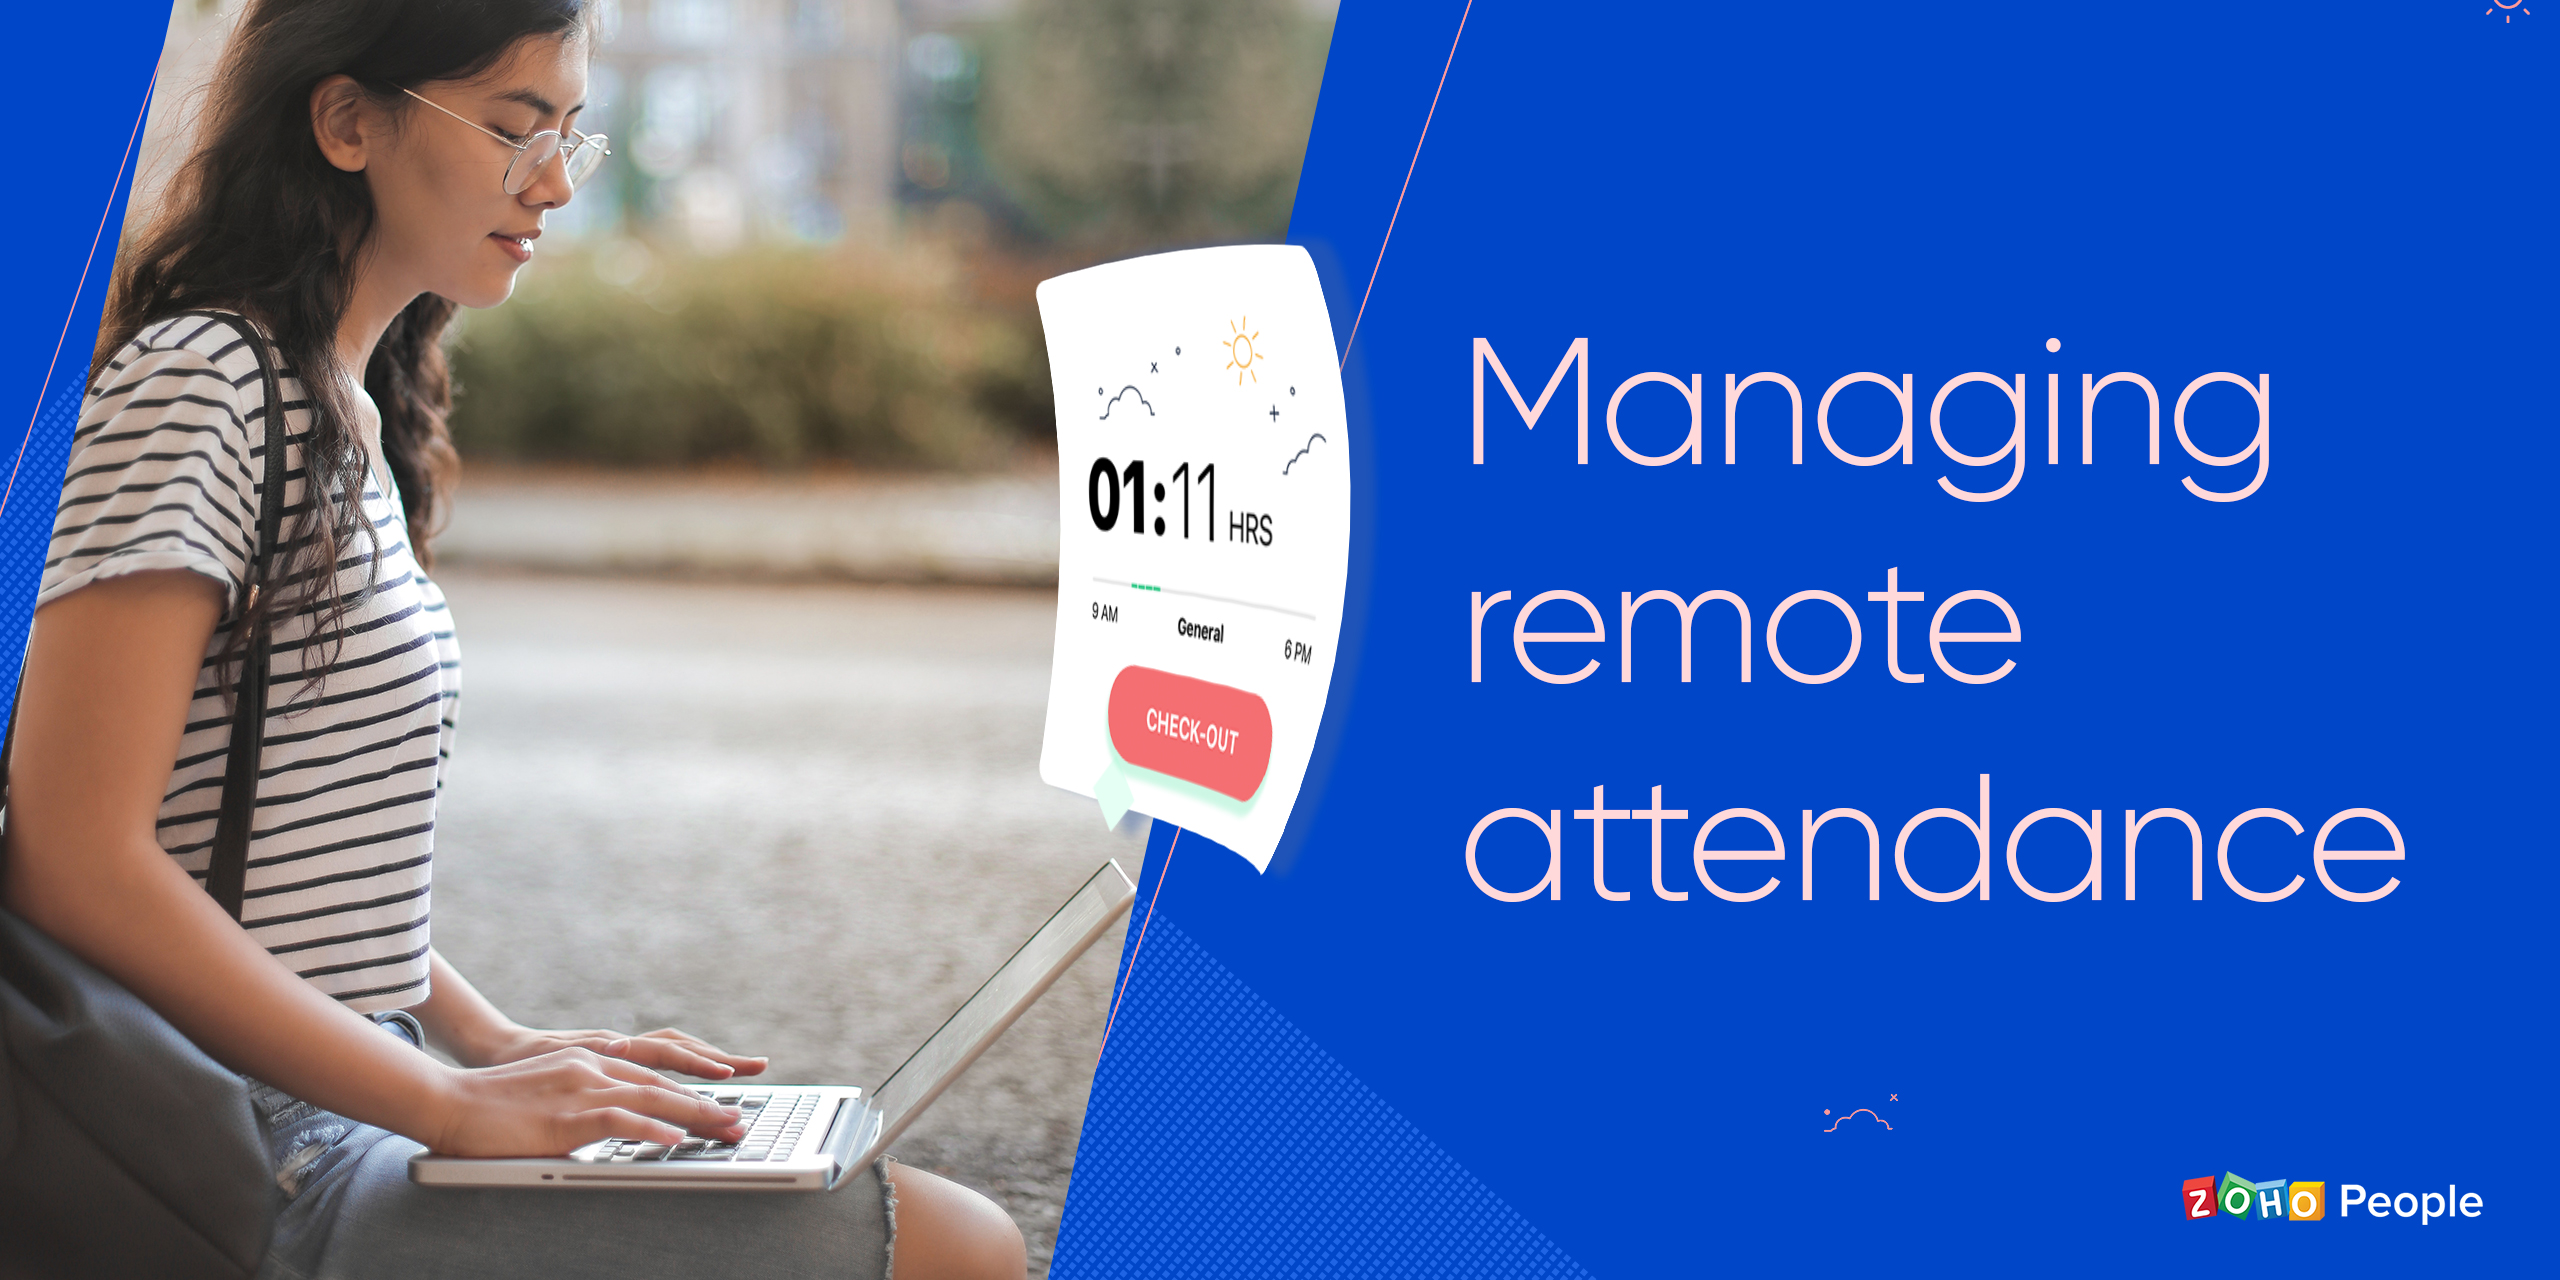 Managing remote attendance with a cloud-based attendance tracker